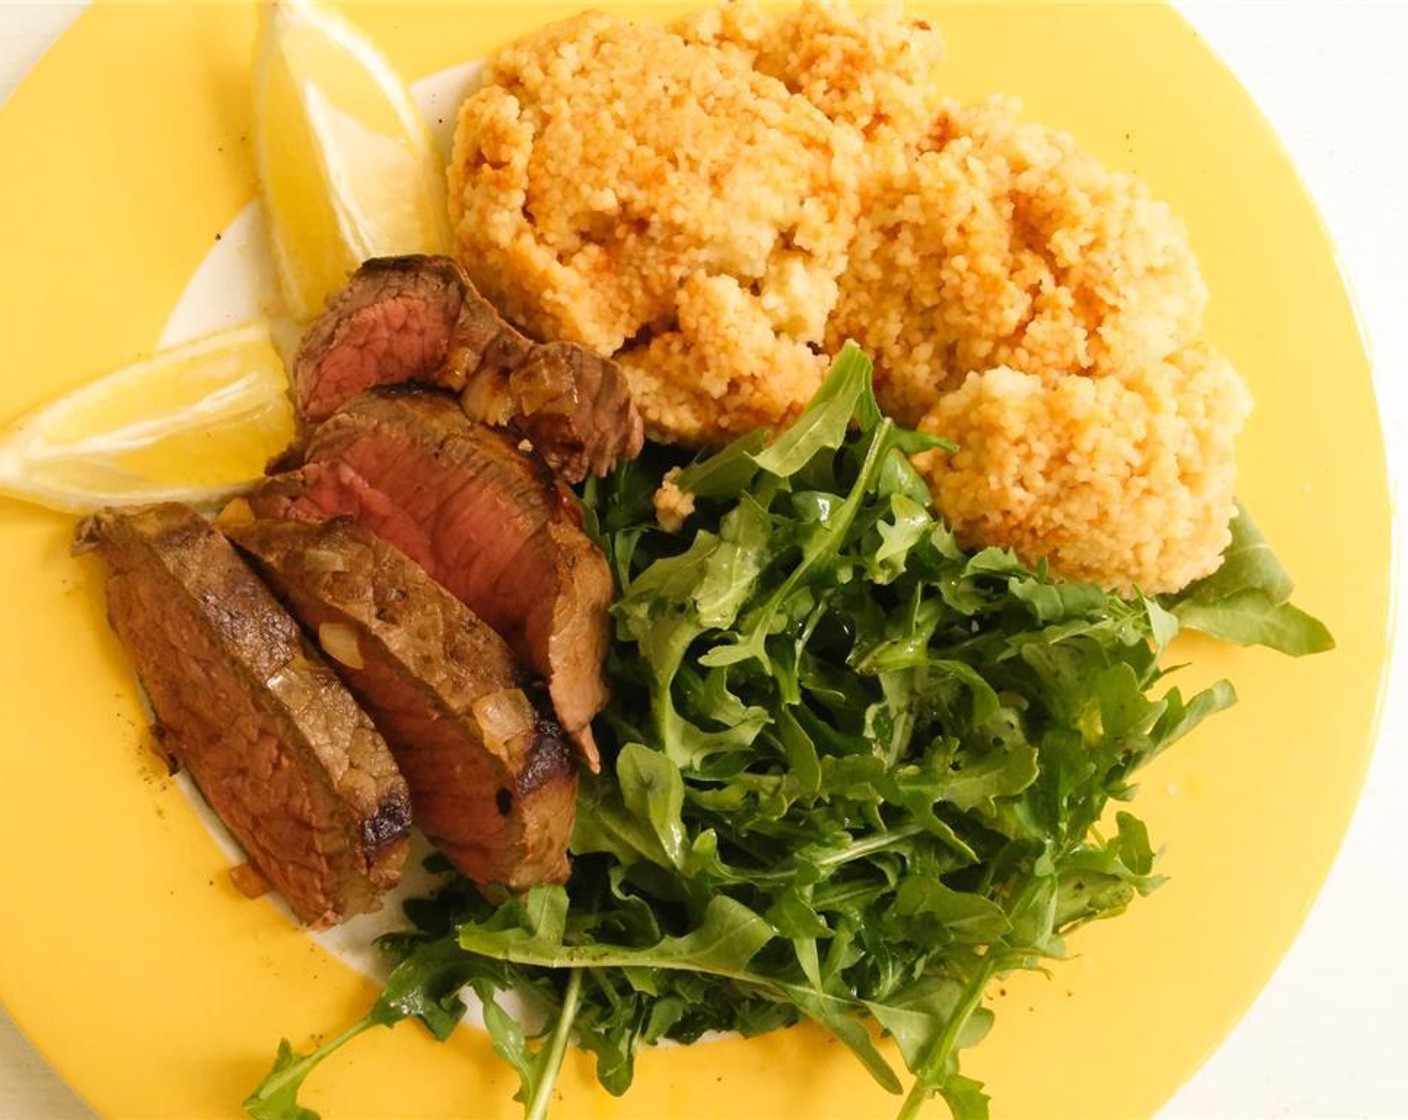 step 6 Take the steaks off the heat and rest for 5 minutes. Slice each steak into 1/2 inch slices against the grain. Arrange the steak on a plate with the arugula and couscous; squeeze over the remaining lemon juice.